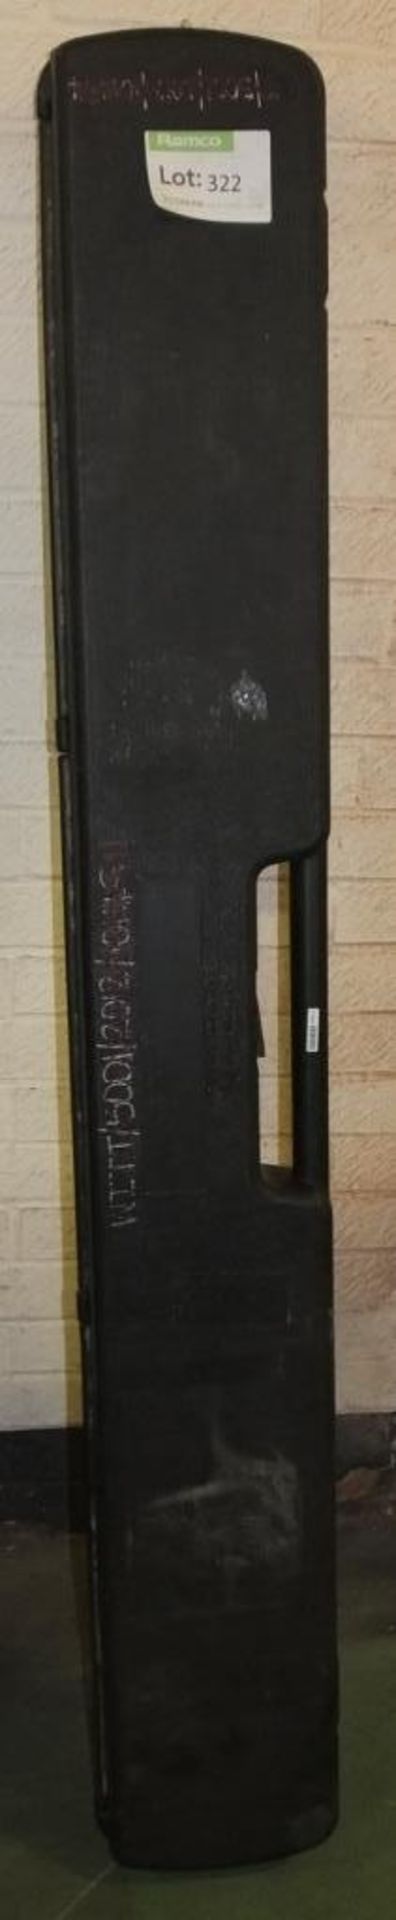 Norbar 5R Torque Wrench with carry case